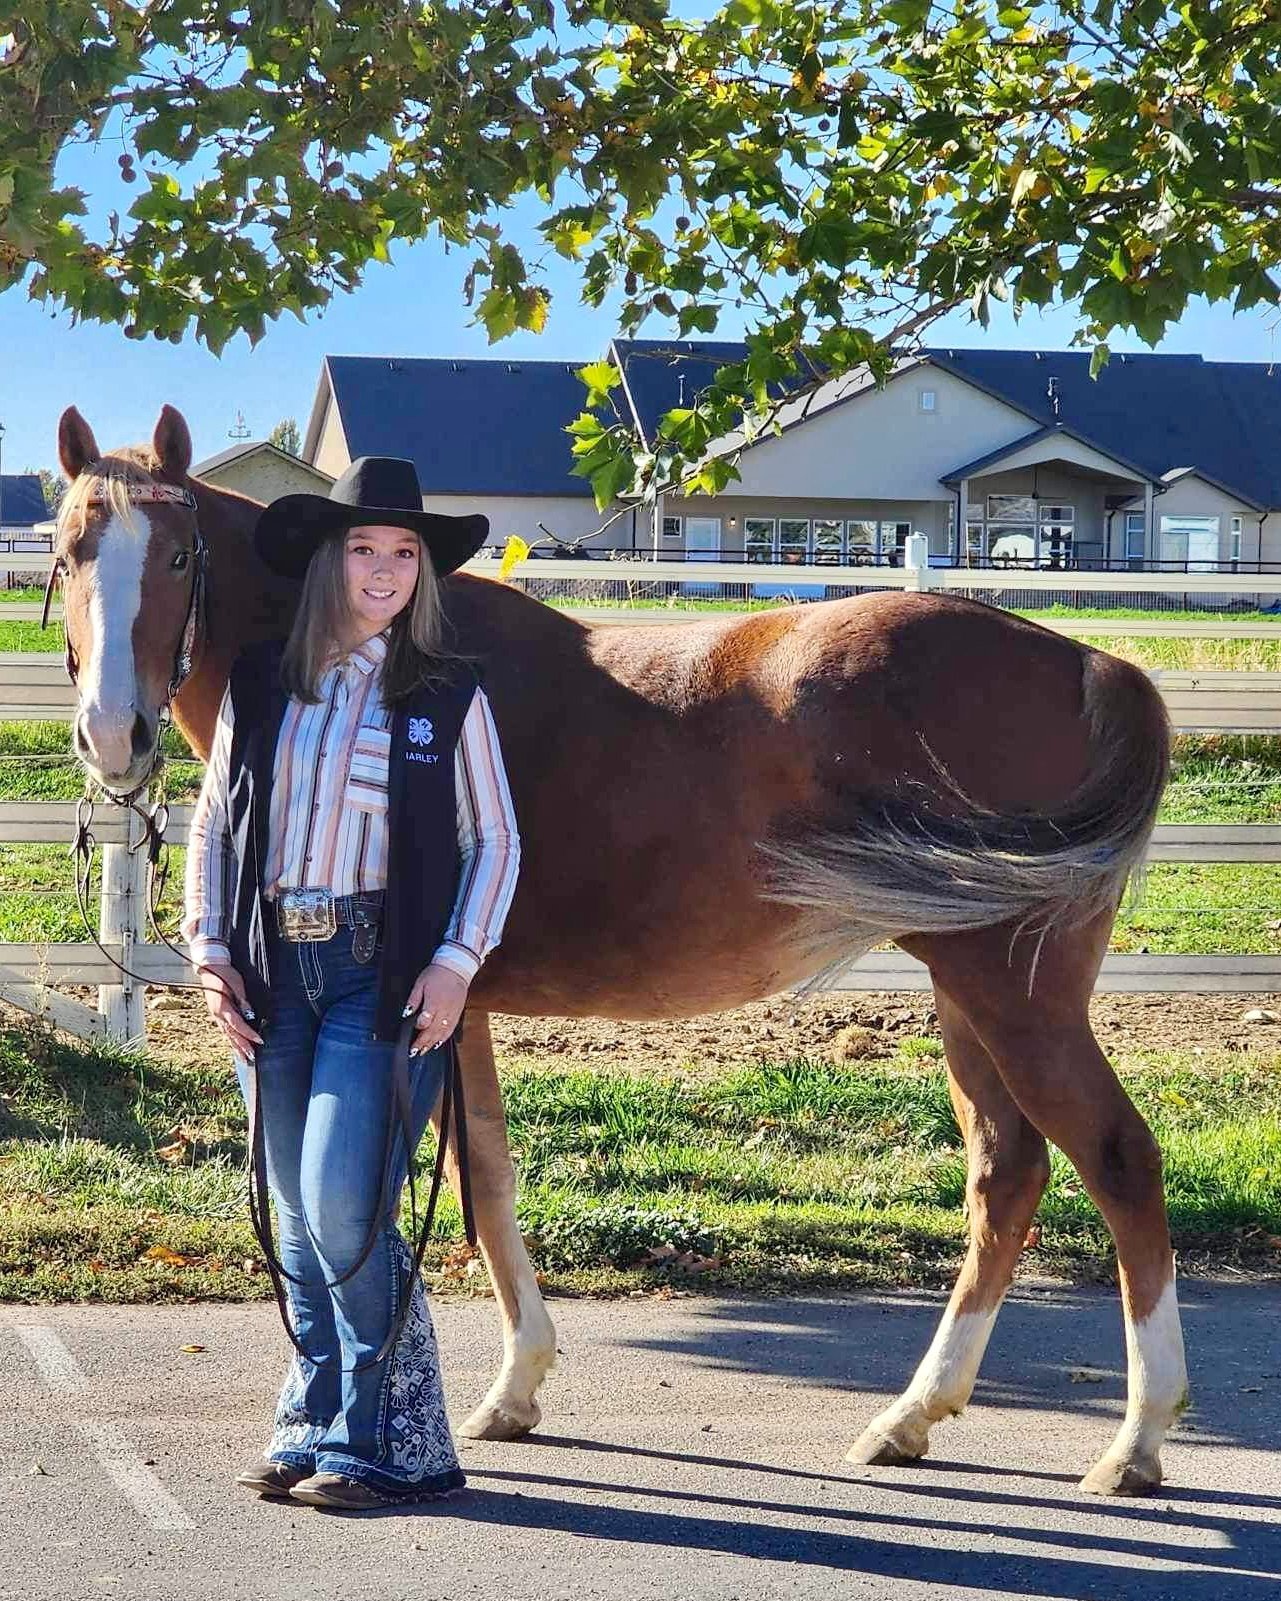 This week, we introduce Spring mentees Harley and Brooke. Both are experienced riders in other disciplines and joined the Mentorship to learn more about the industry and opportunities available to them.

𝗛𝗮𝗿𝗹𝗲𝘆 𝗟𝗮𝘆𝗺𝗮𝗻 (𝗠𝗲𝗻𝘁𝗼𝗿𝗲𝗱 𝗯